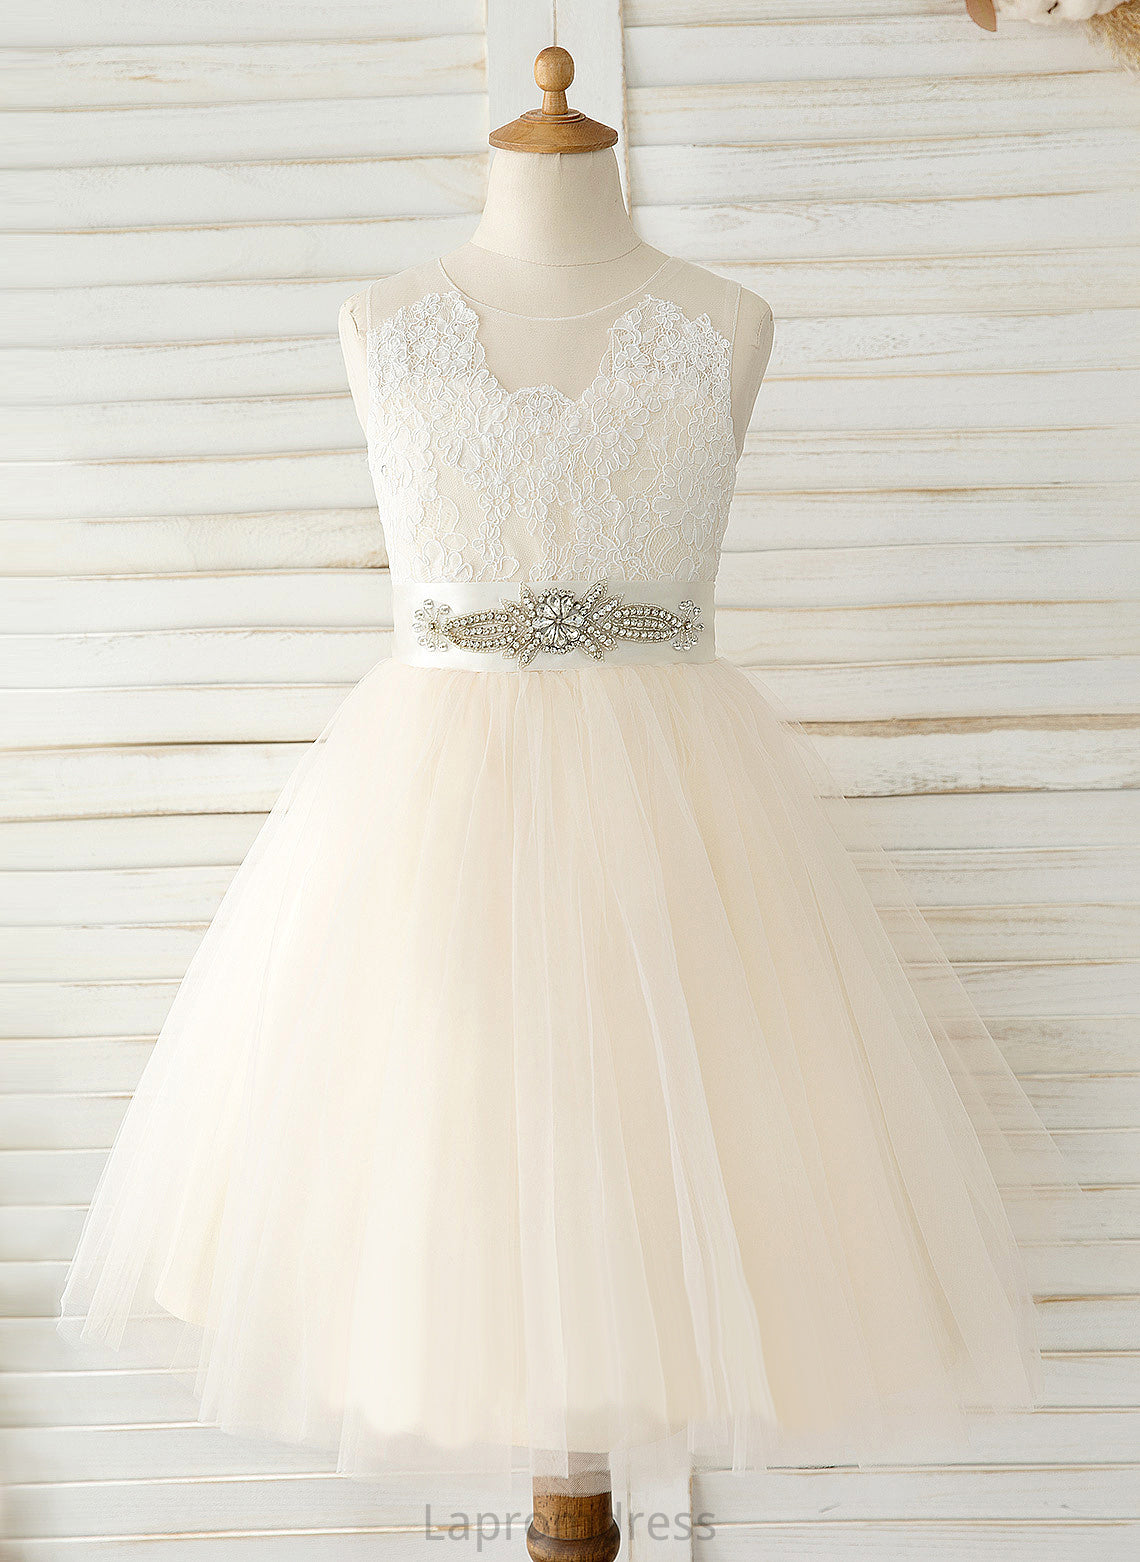 Tulle/Lace Neck A-Line Ariana With Knee-length - Bow(s) Flower Sleeveless Dress Flower Girl Dresses Scoop Girl